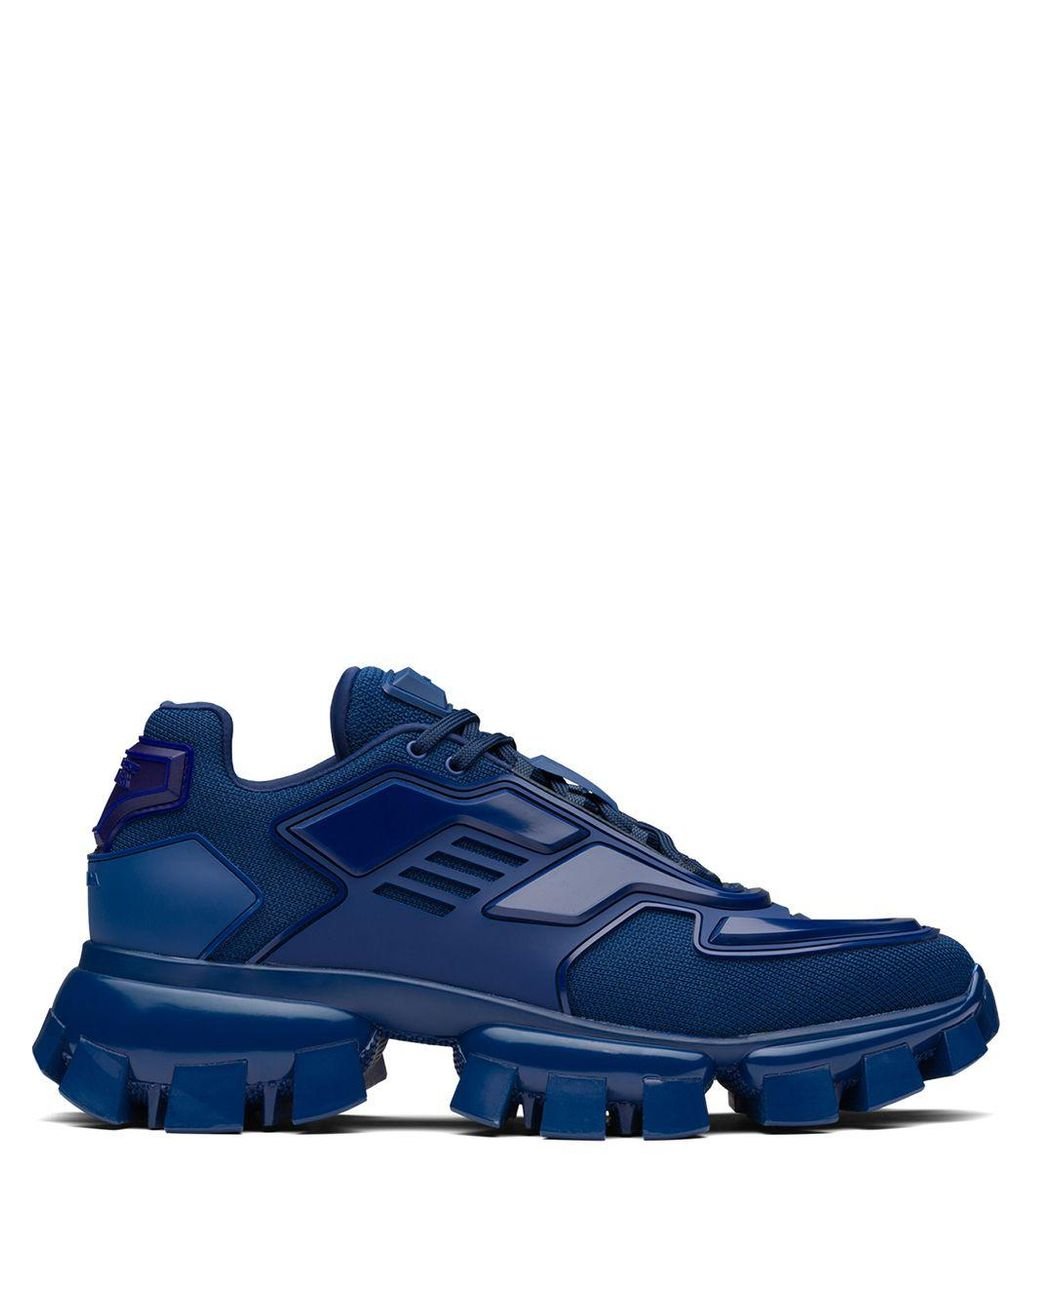 The unusual three-dimensional effect of the upper created by the injected  rubber eyest… | Prada cloudbust, Prada cloudbust thunder sneakers, Prada  cloudbust thunder